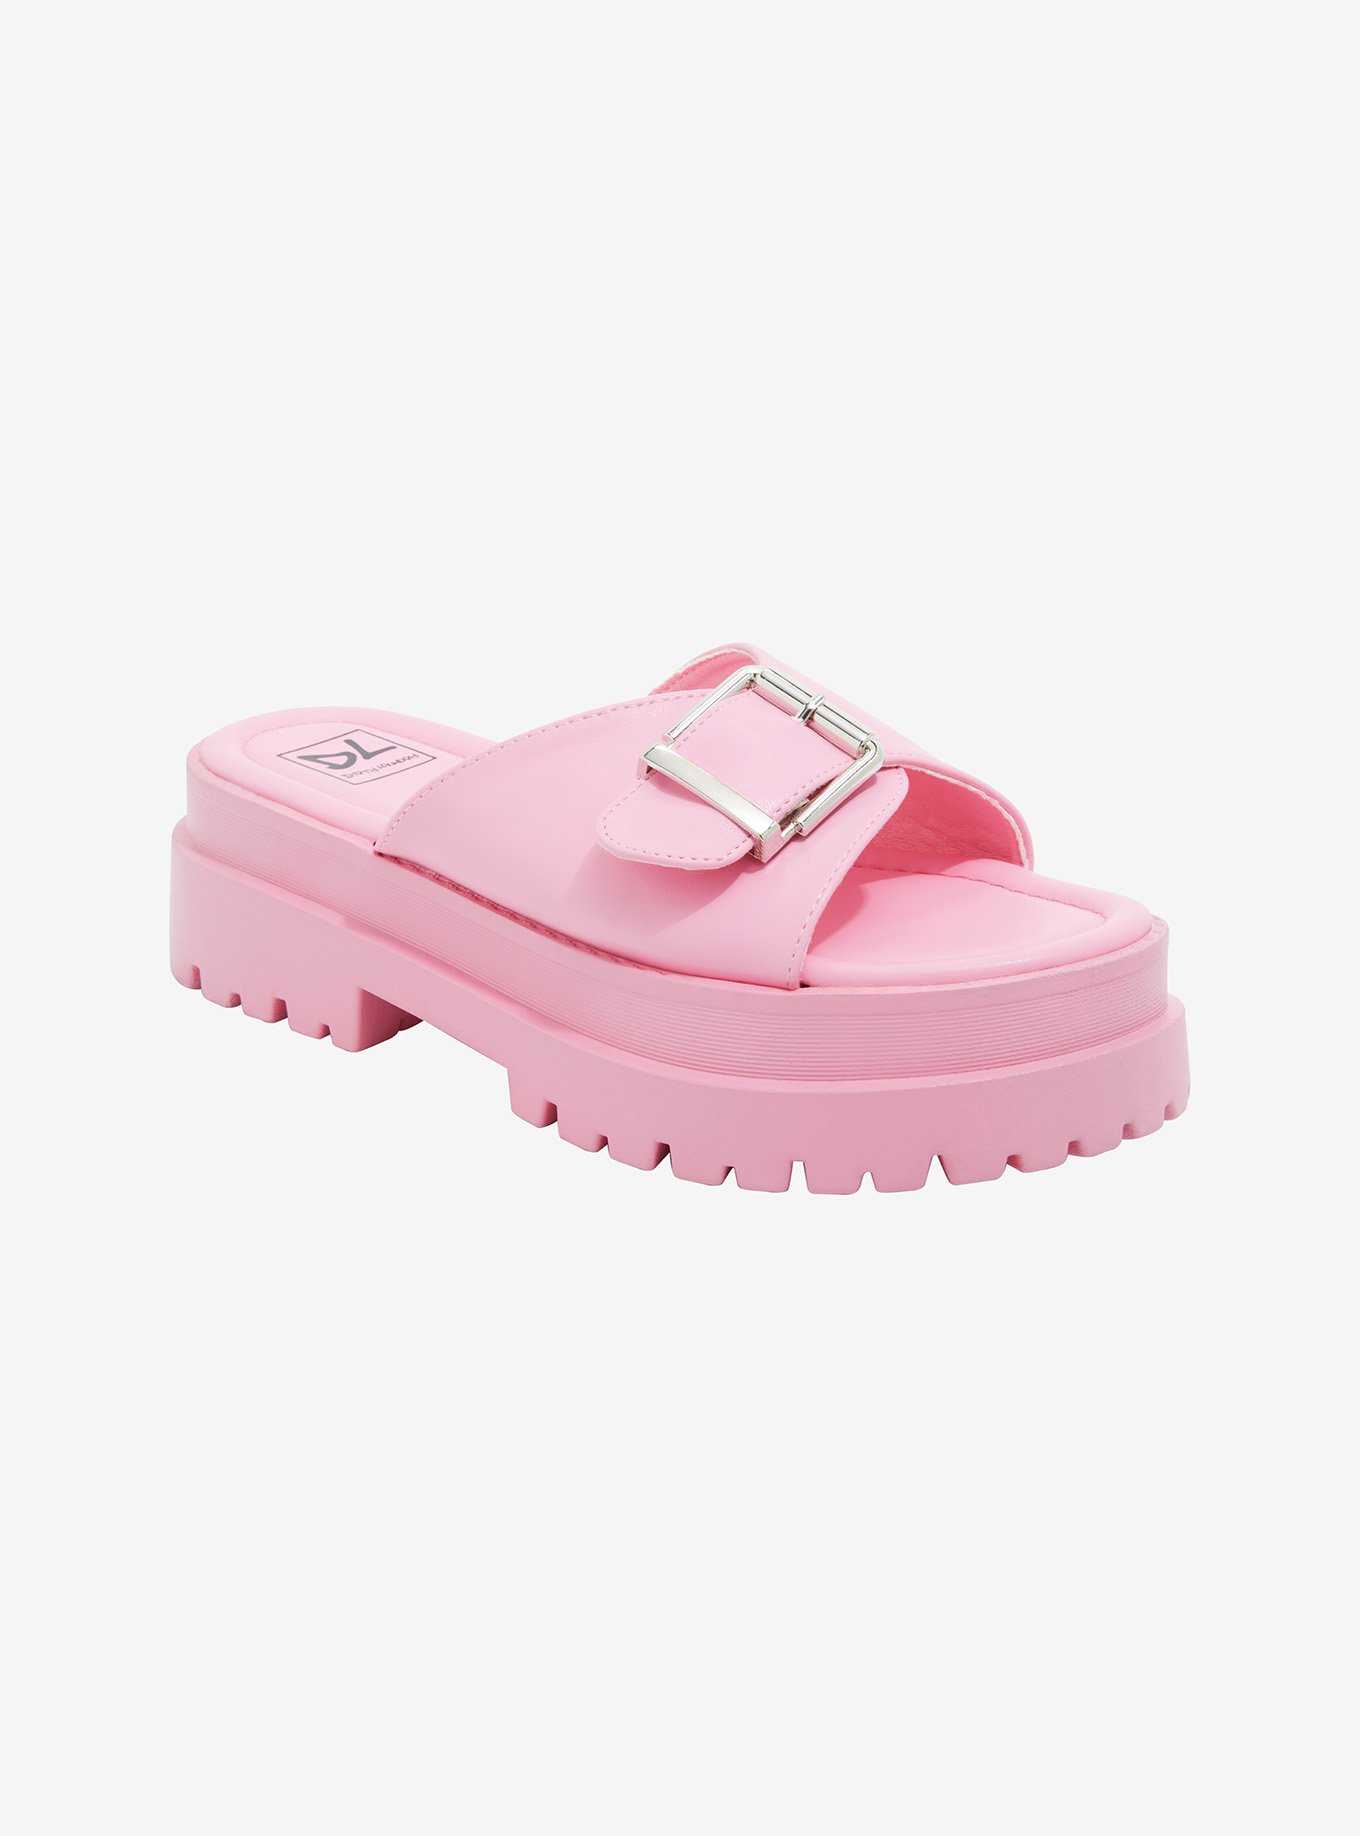 Dirty Laundry Pink Buckle Sandals, , hi-res